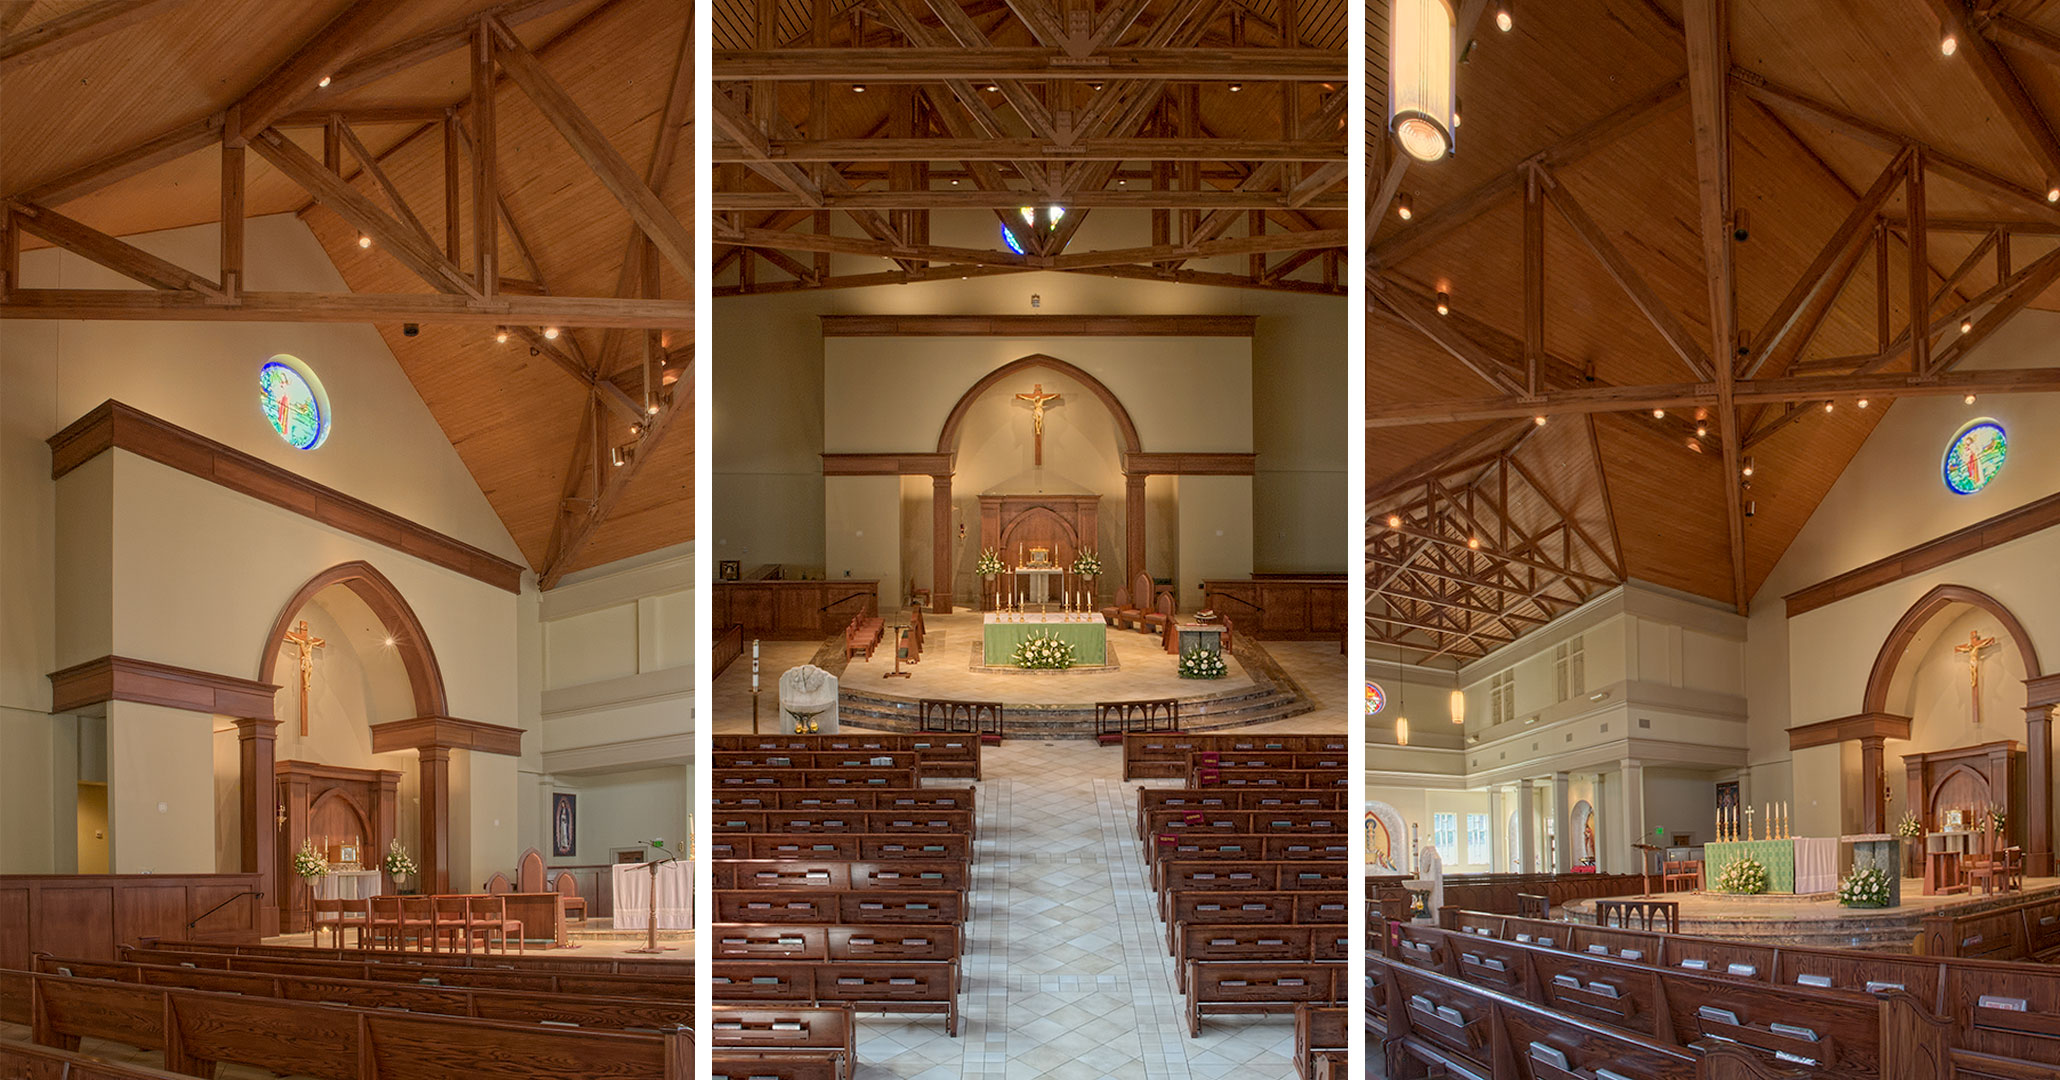 St. Mark’s Catholic Church was designed by Boudreaux architects and interior designers.